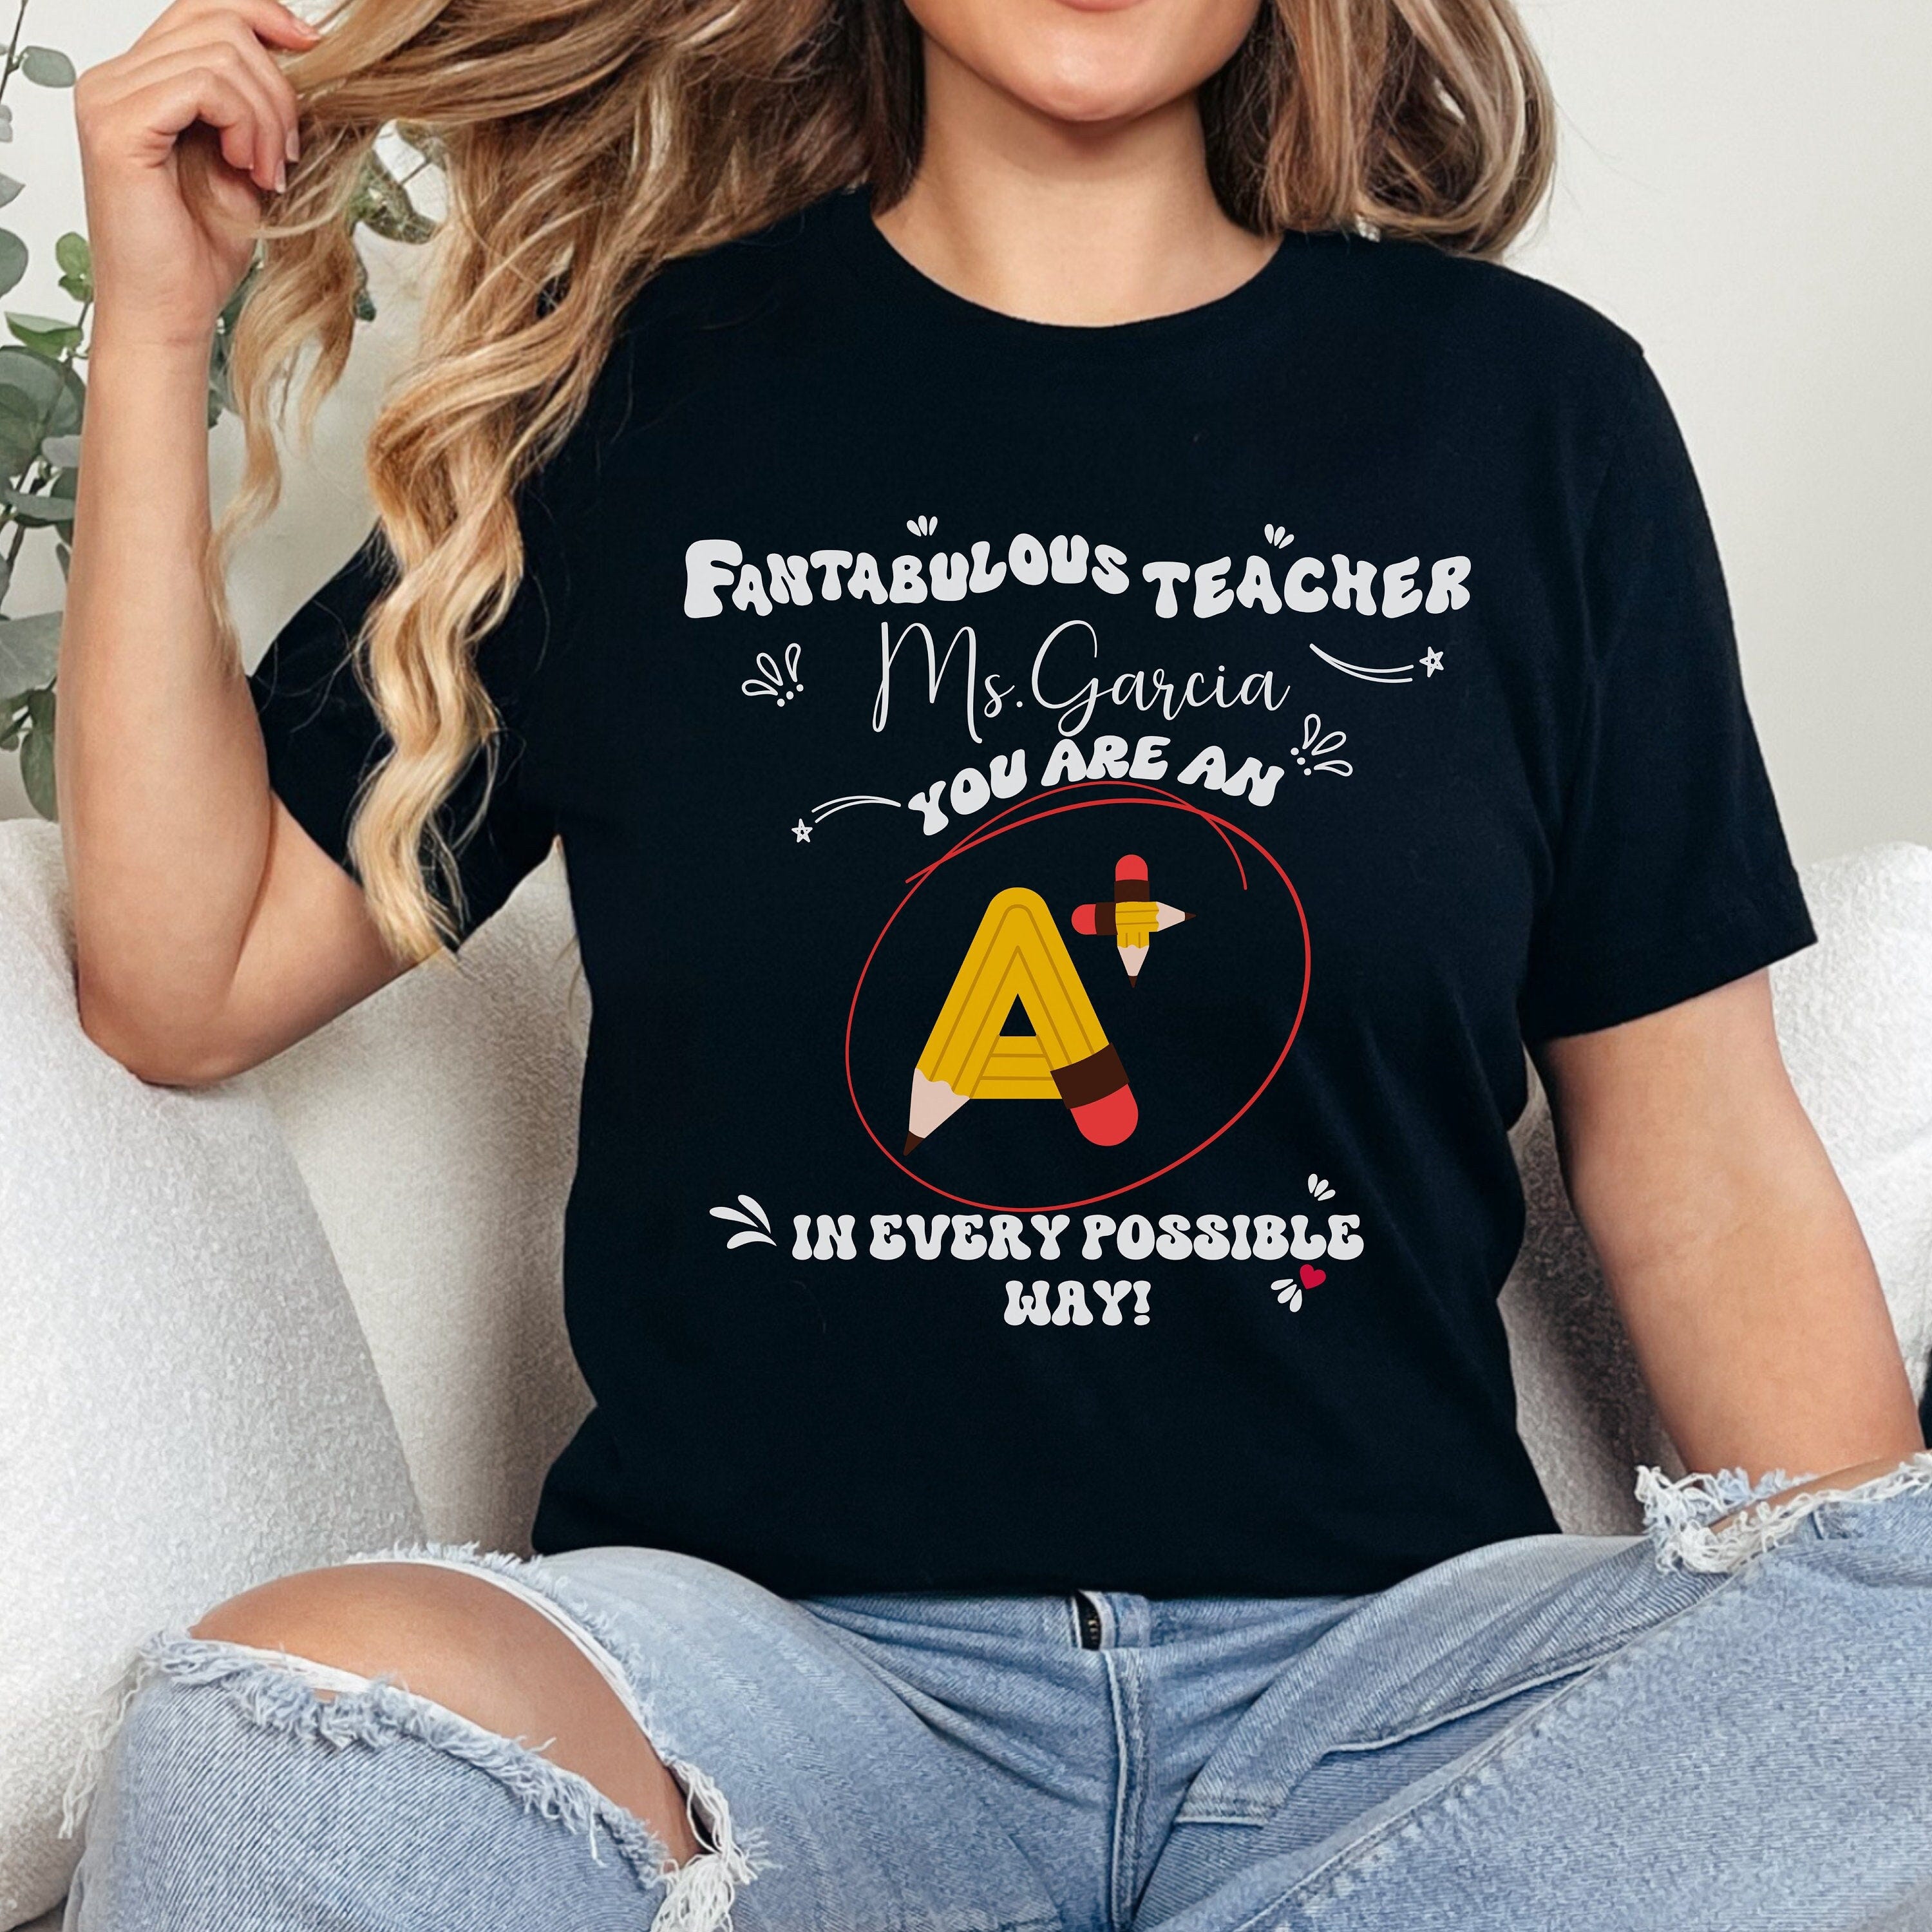 Personalized Inspirational Teacher Appreciation shirt,Custom Quote Teacher name tee,Retro Funny Elementary, Teachr End of Year Thnk You Gift